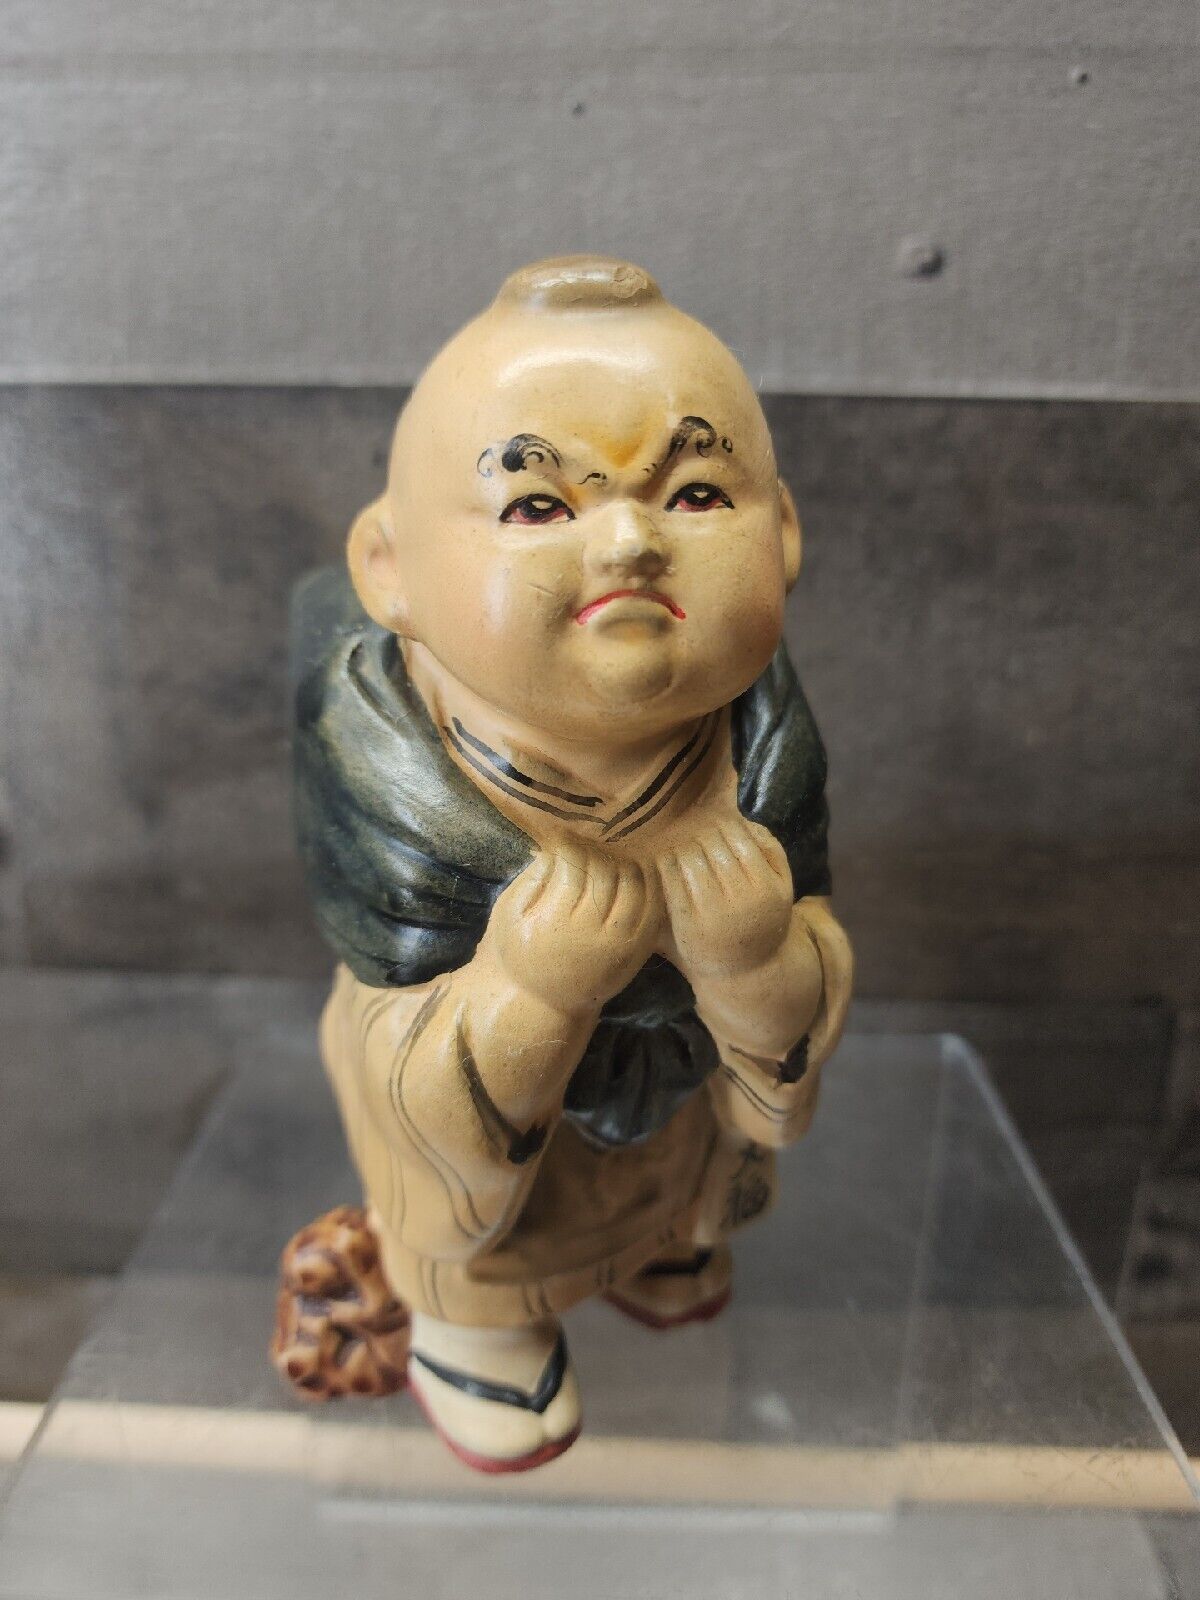 Vintage Japanese Pottery Budai Figure Angry Face Small 6 Inch